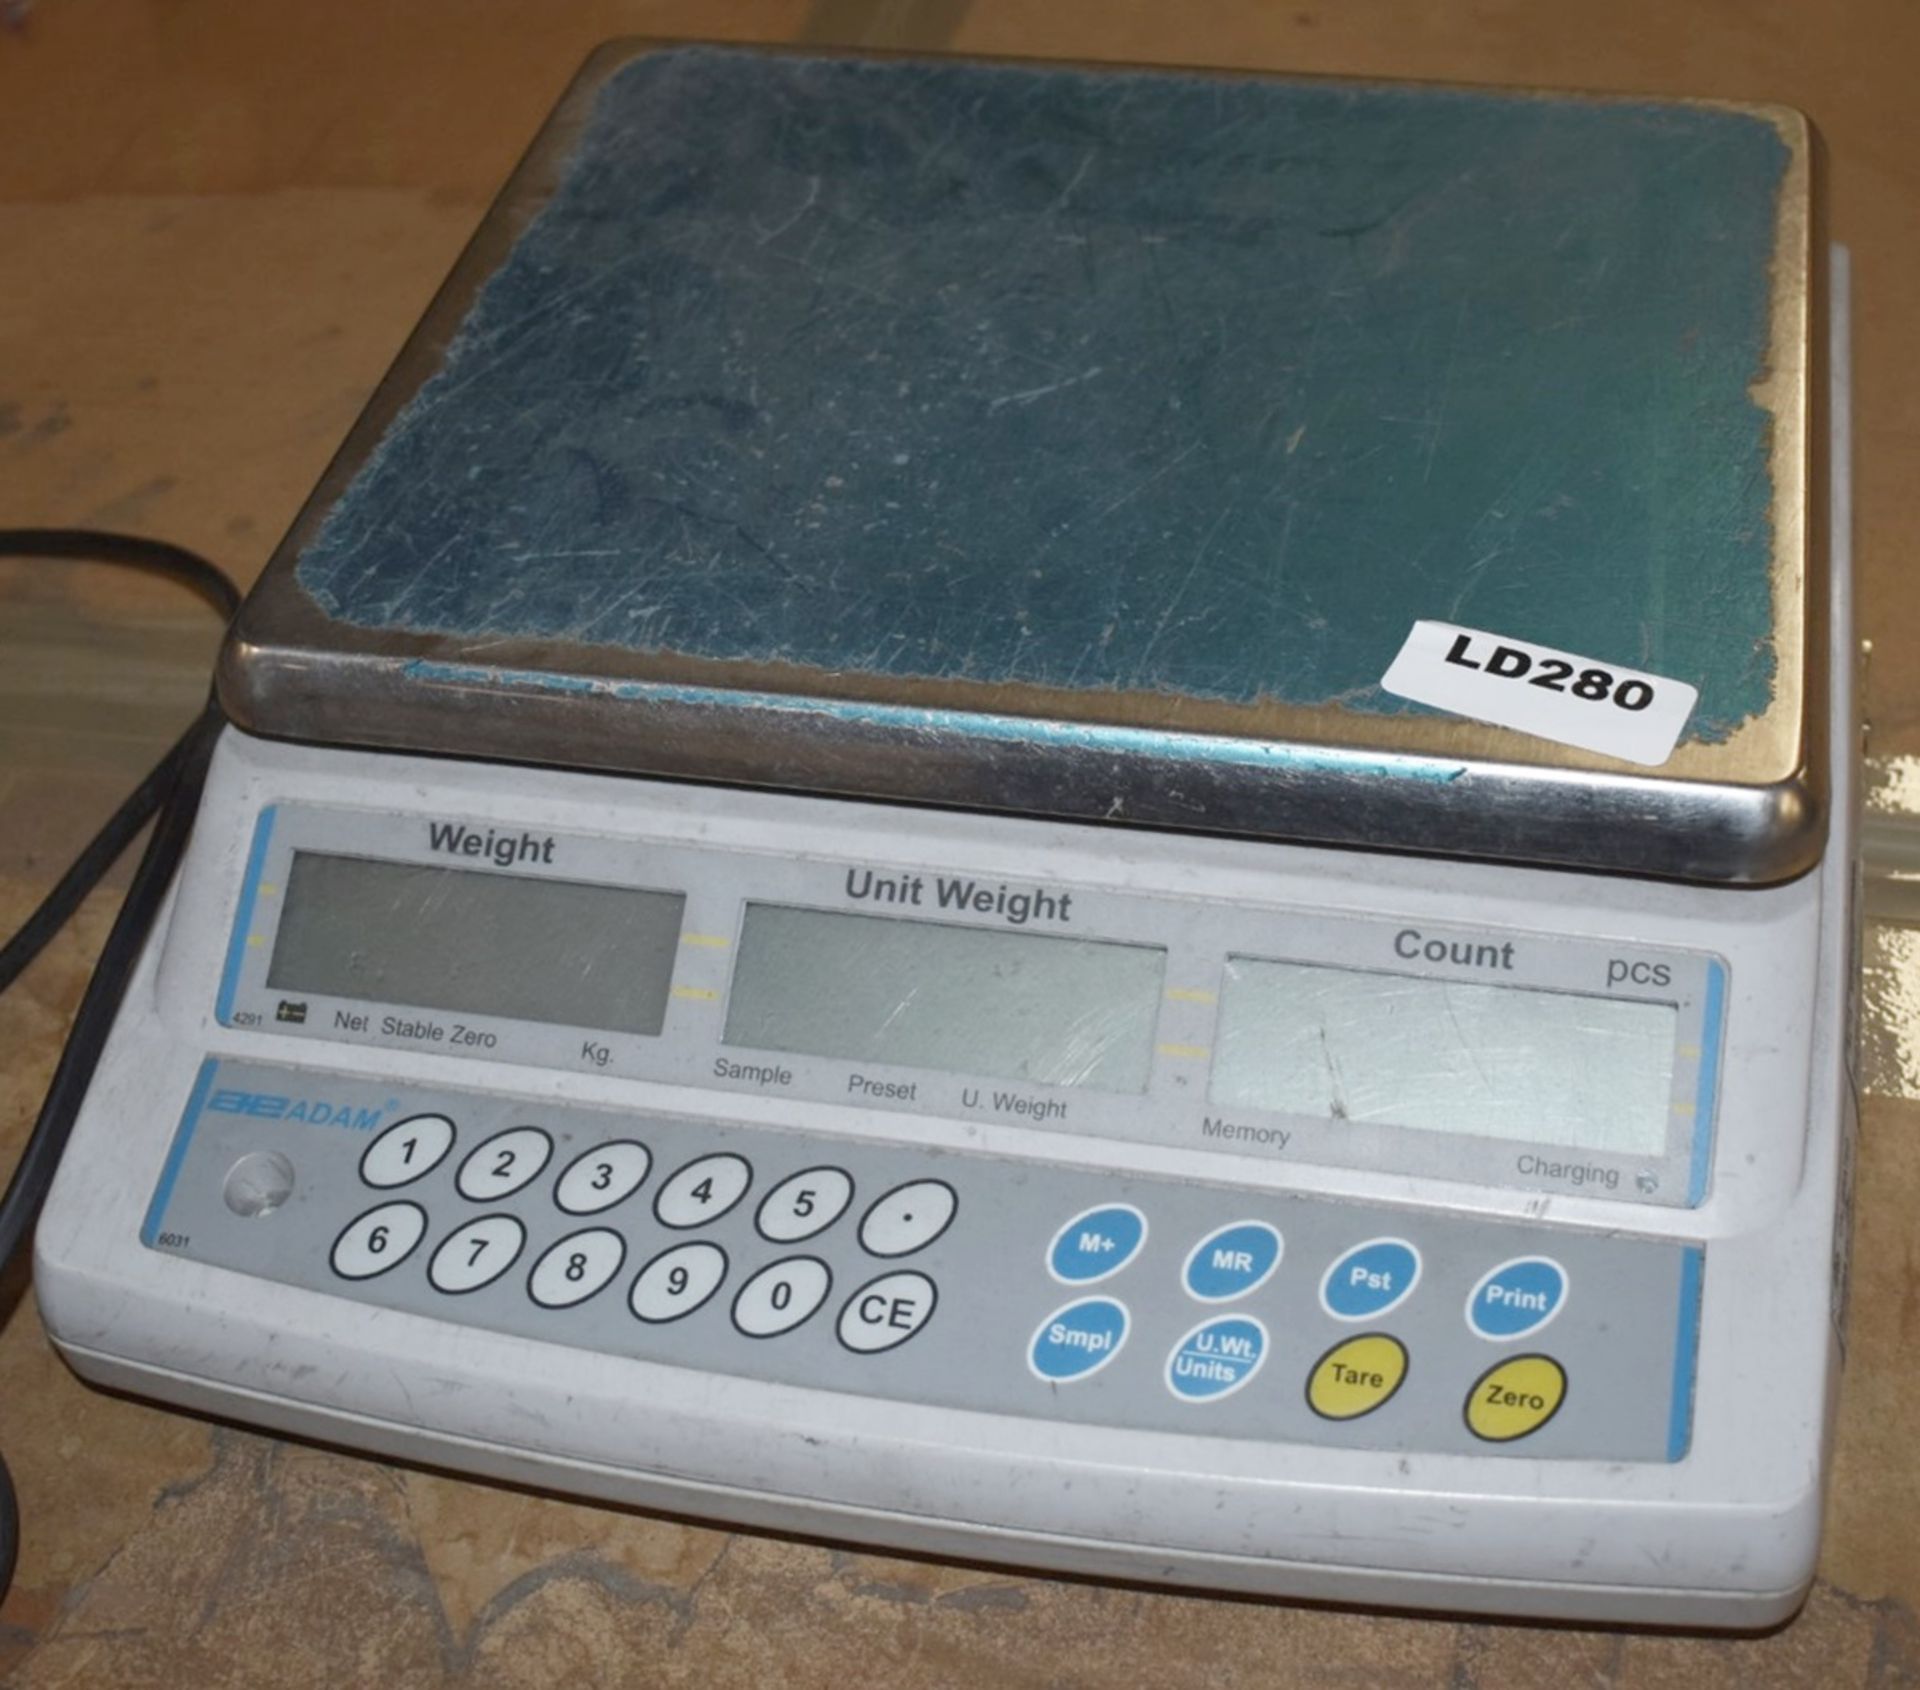 1 x Adam Equipment Electronic Weighing Scales - Ref LD280 - CL480 - Location: Nottingham NG15